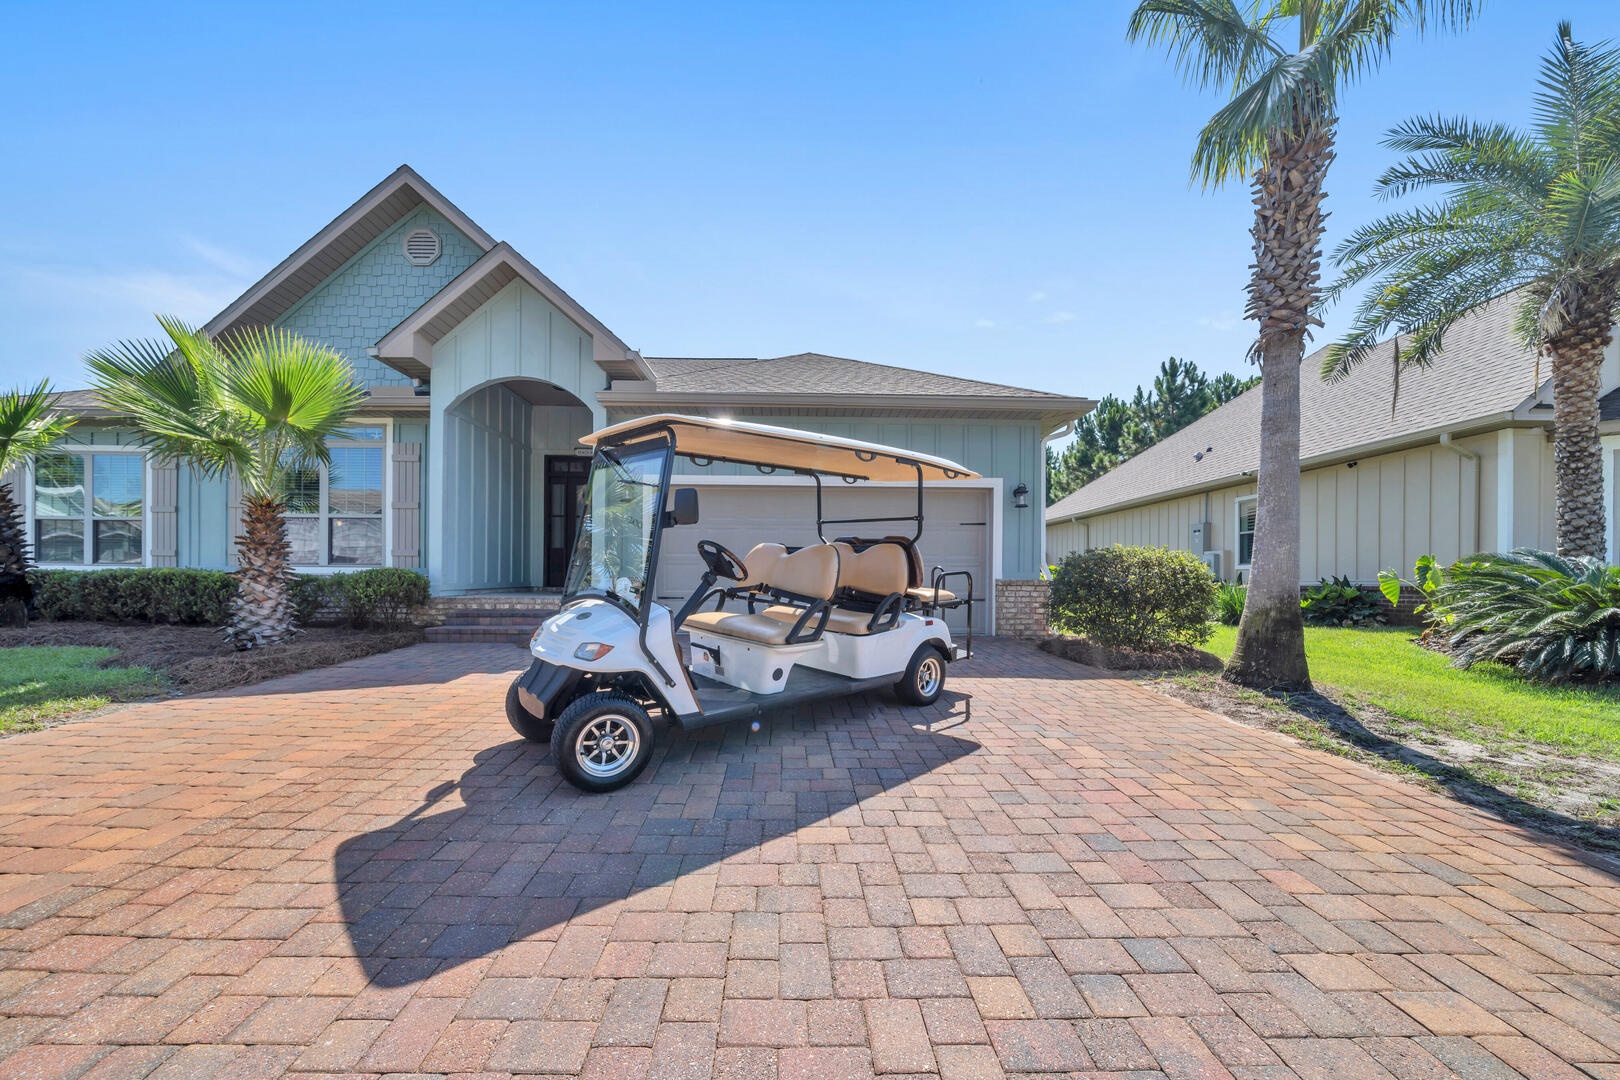 A 6-passenger golf cart is INCLUDED!